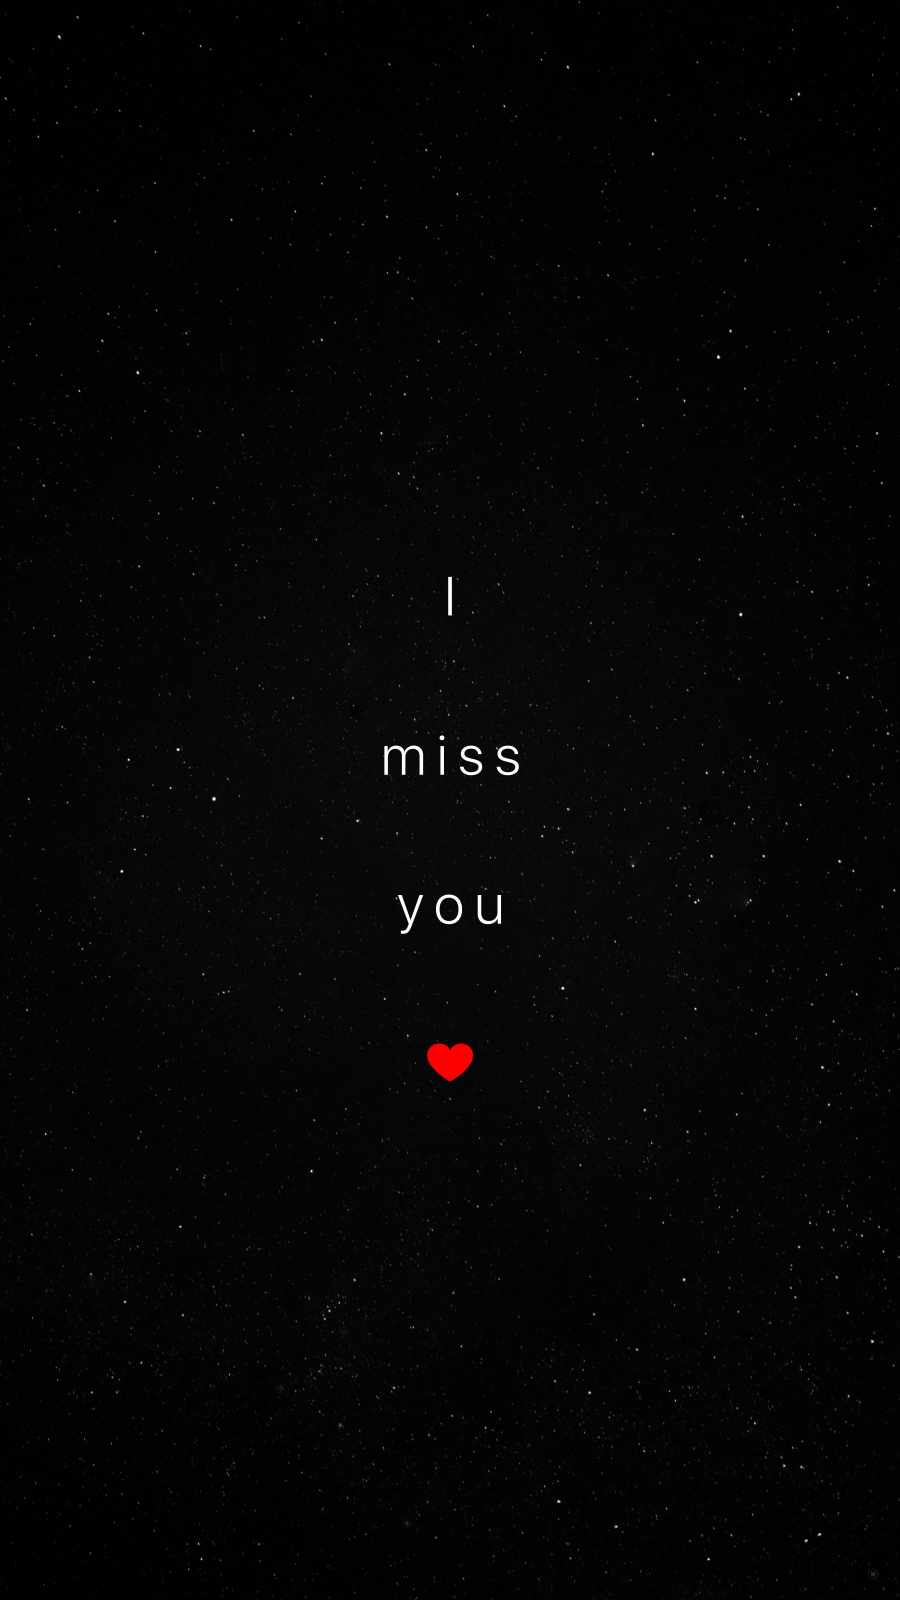 I Miss You 4K IPhone Wallpaper - IPhone Wallpapers : iPhone Wallpapers